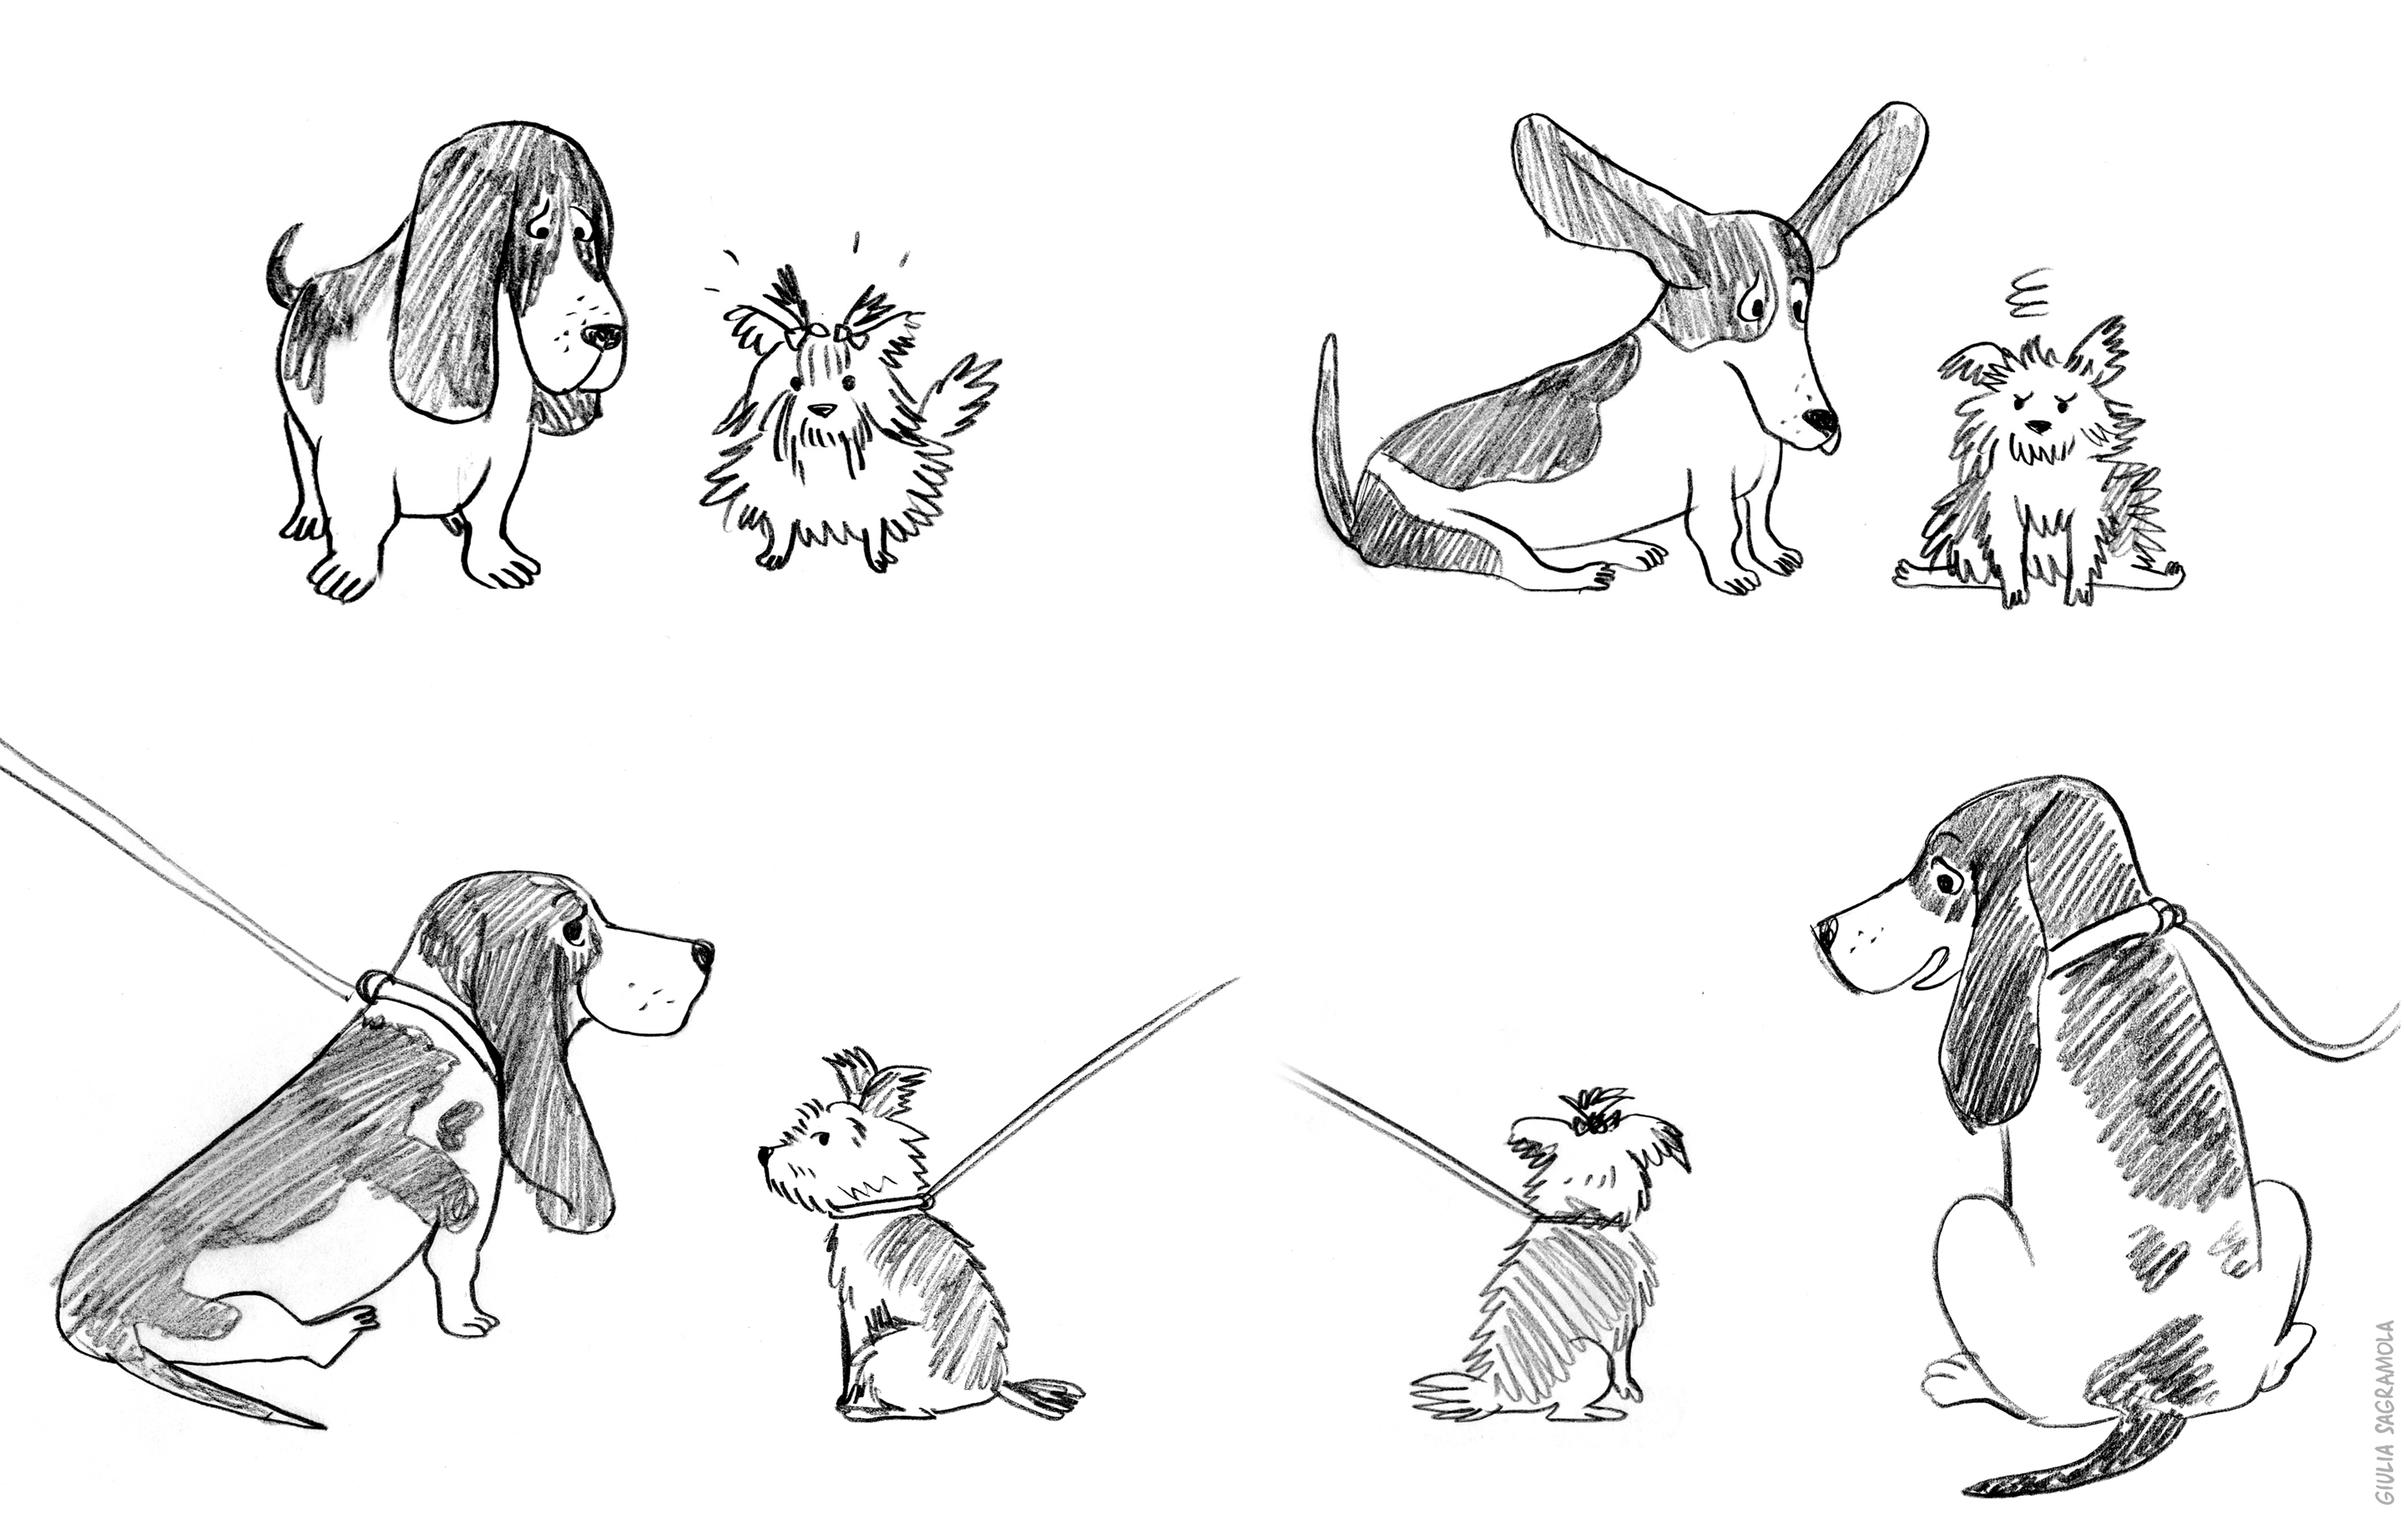 barkers_sketches_for_website02